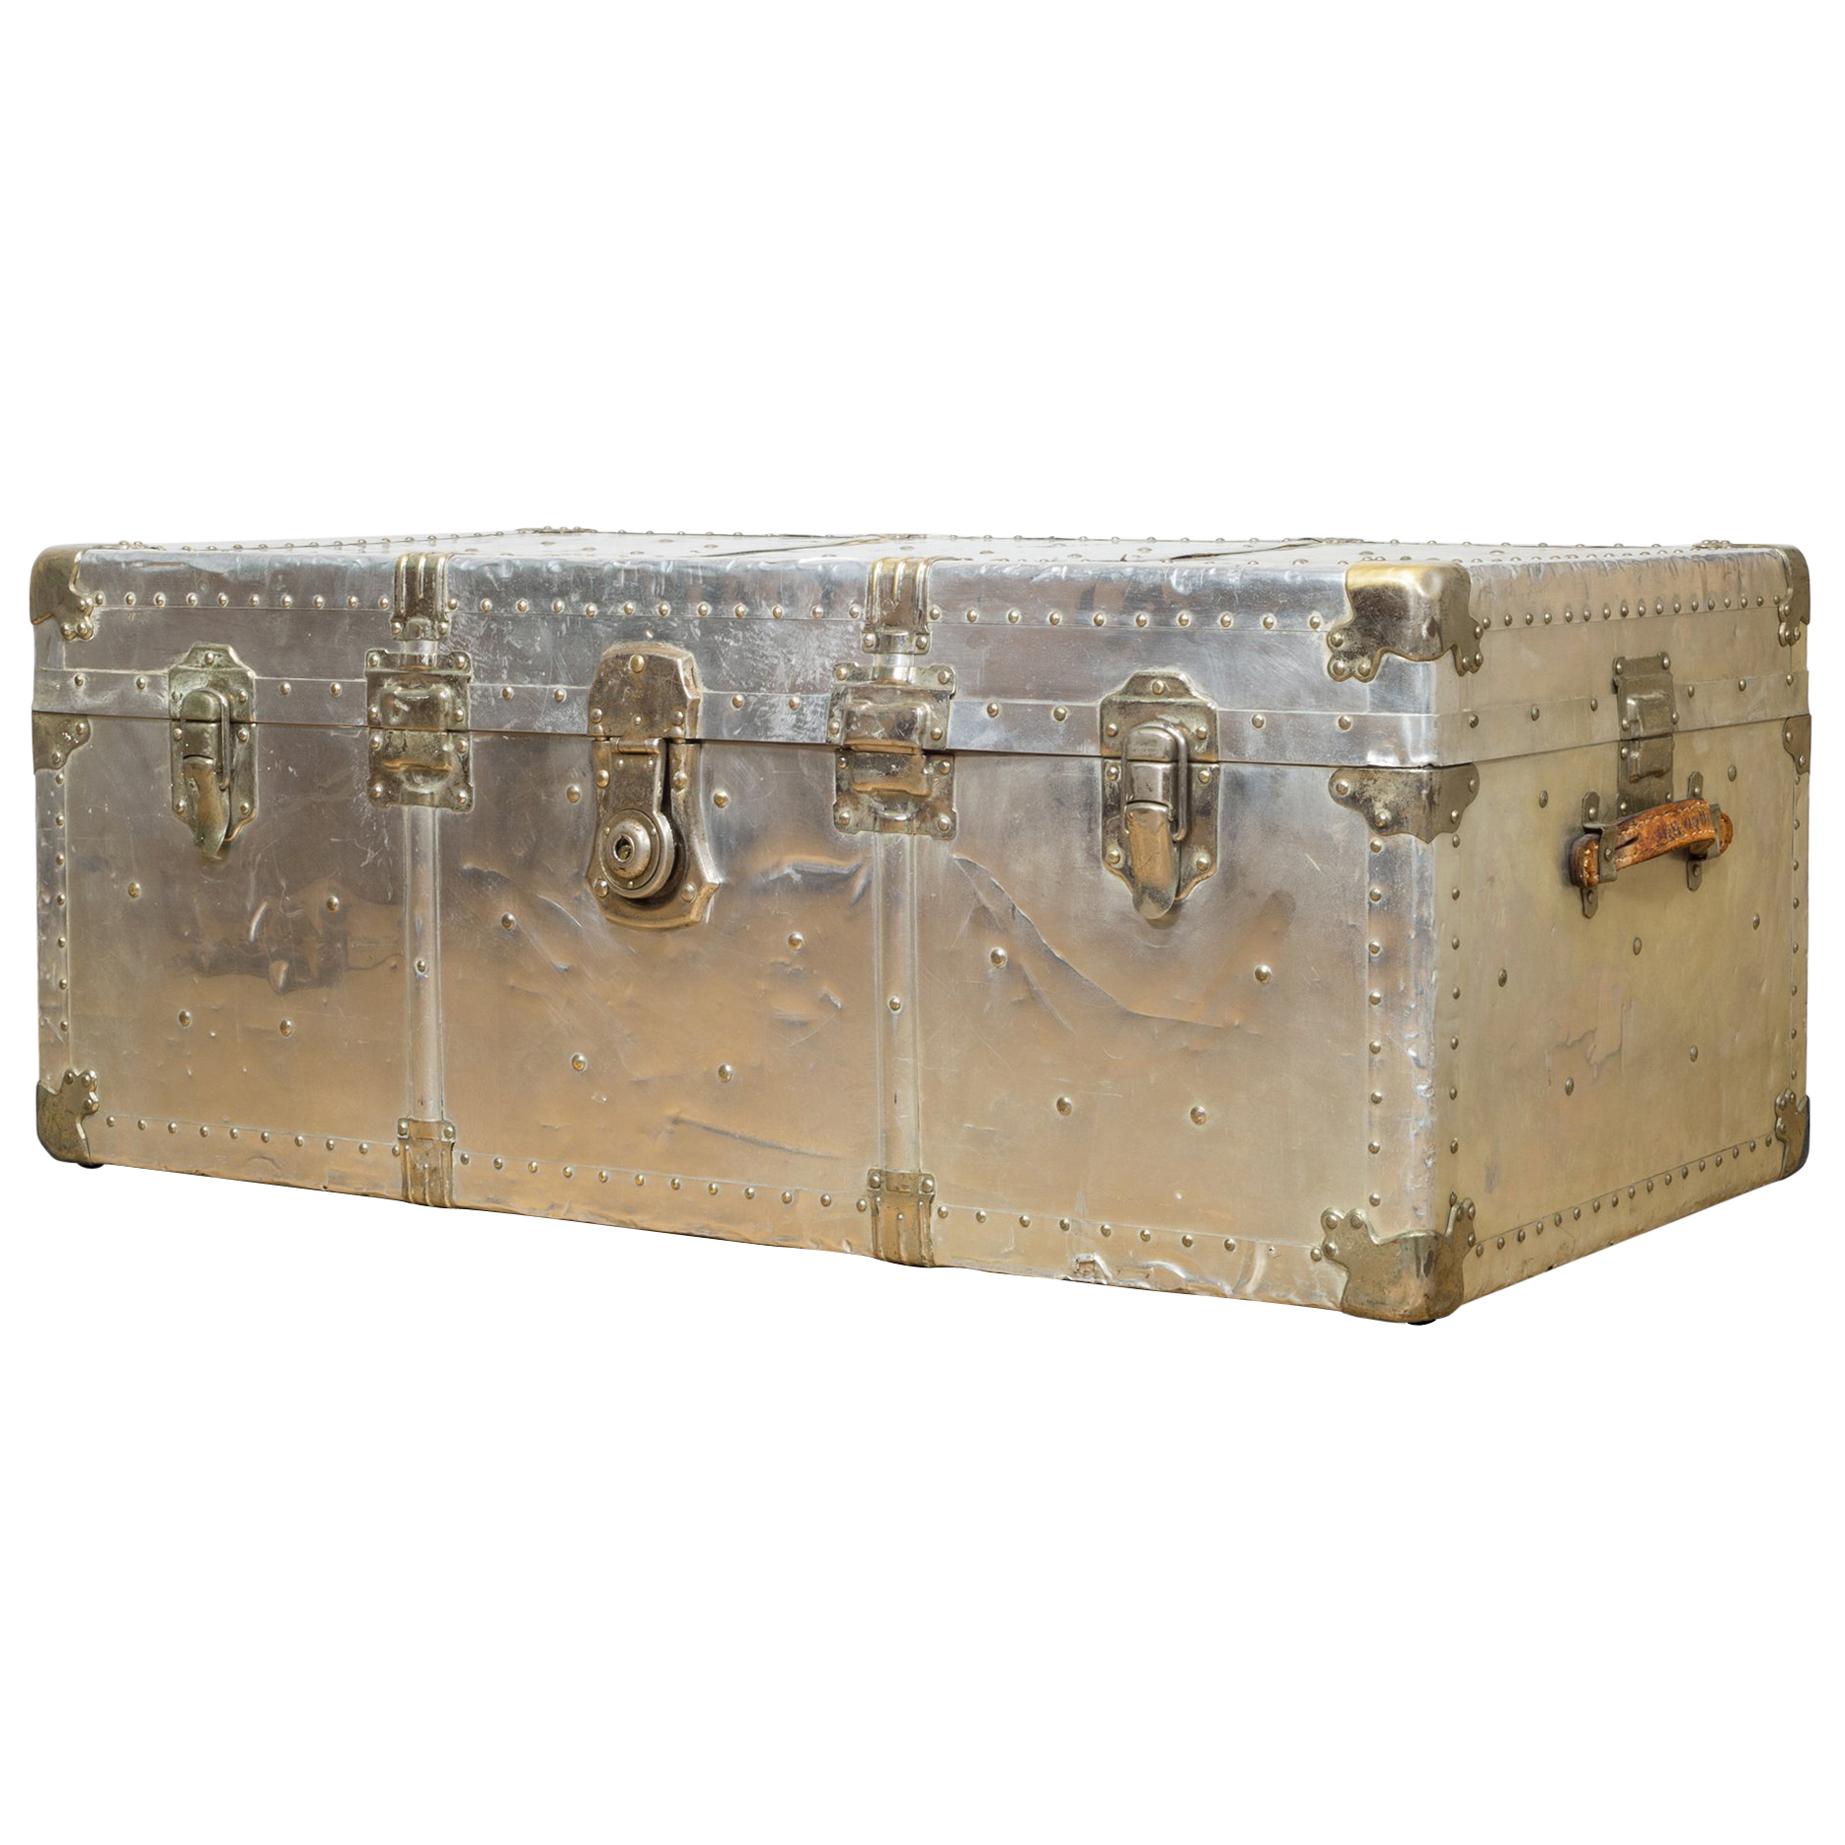 Early 20th Century Brass and Polished Aluminum Trunk with Leather Handles